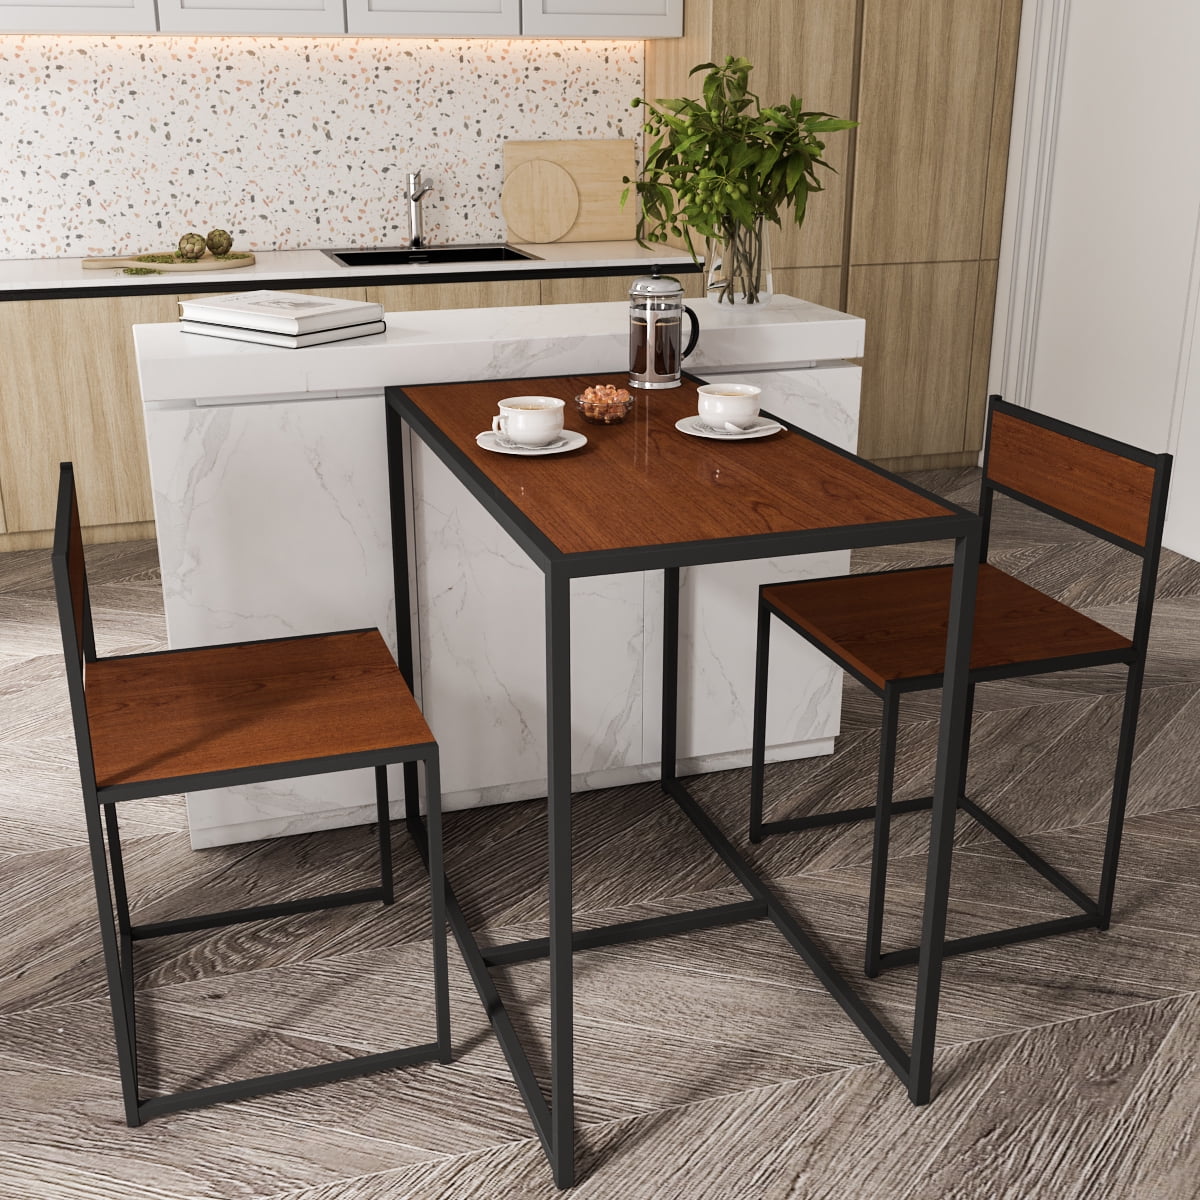 Small White Wooden Dining Table And 2 Chairs Set Kitchen Diner Breakfast Room 